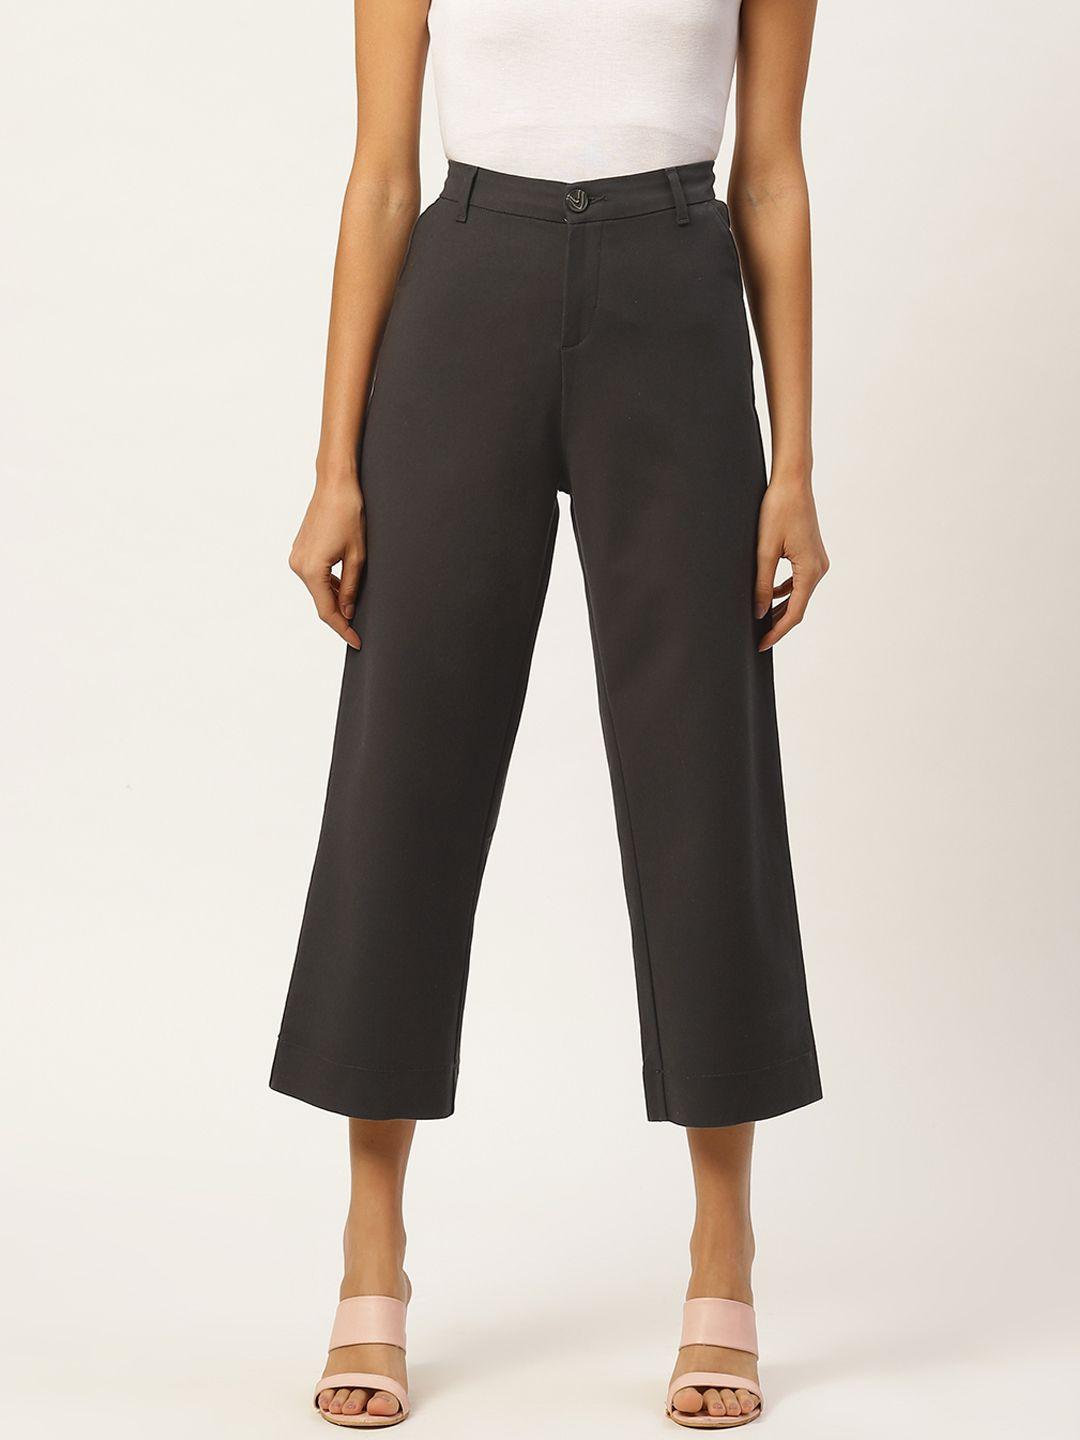 xpose-women-charcoal-grey-solid-high-rise-cropped-parallel-trousers